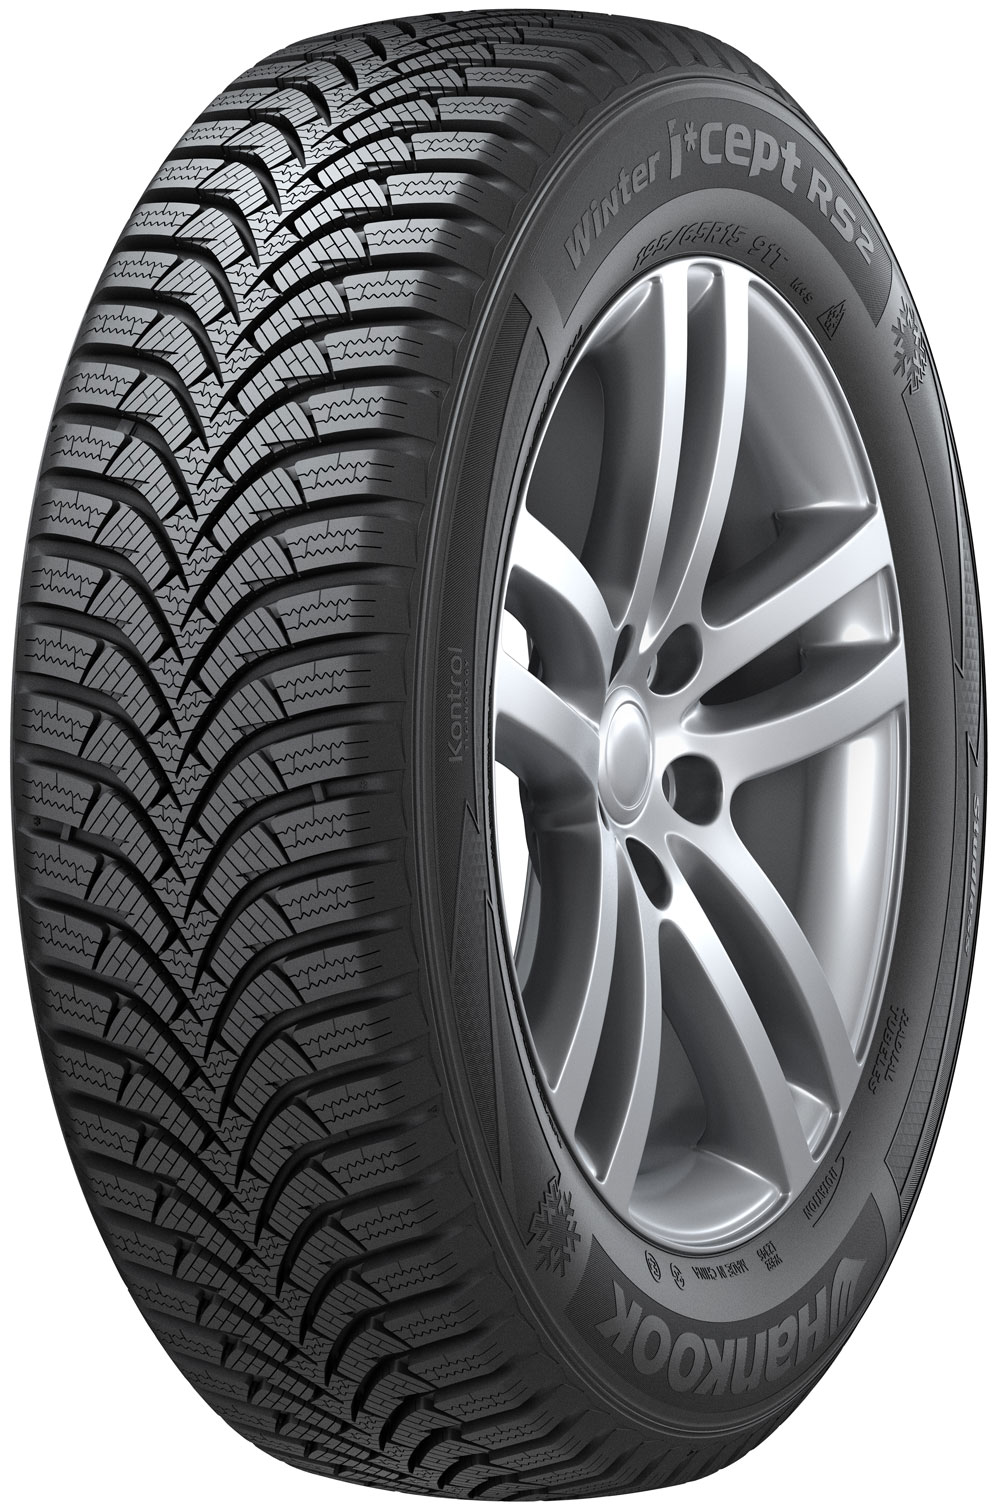 Anvelope auto HANKOOK Winter icept RS 2 (W452) XL 165/60 R14 79T